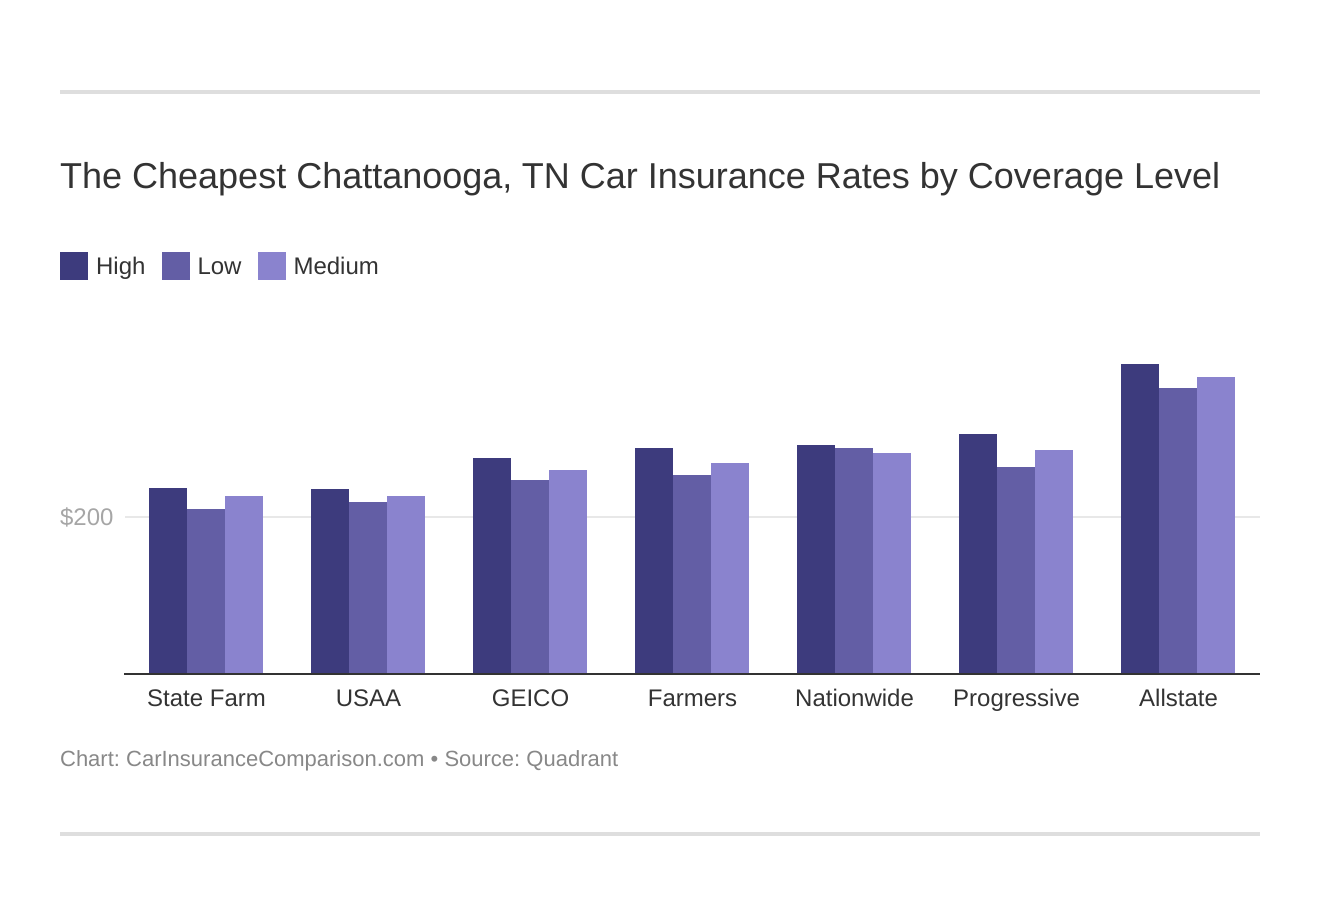 The Cheapest Chattanooga, TN Car Insurance Rates by Coverage Level